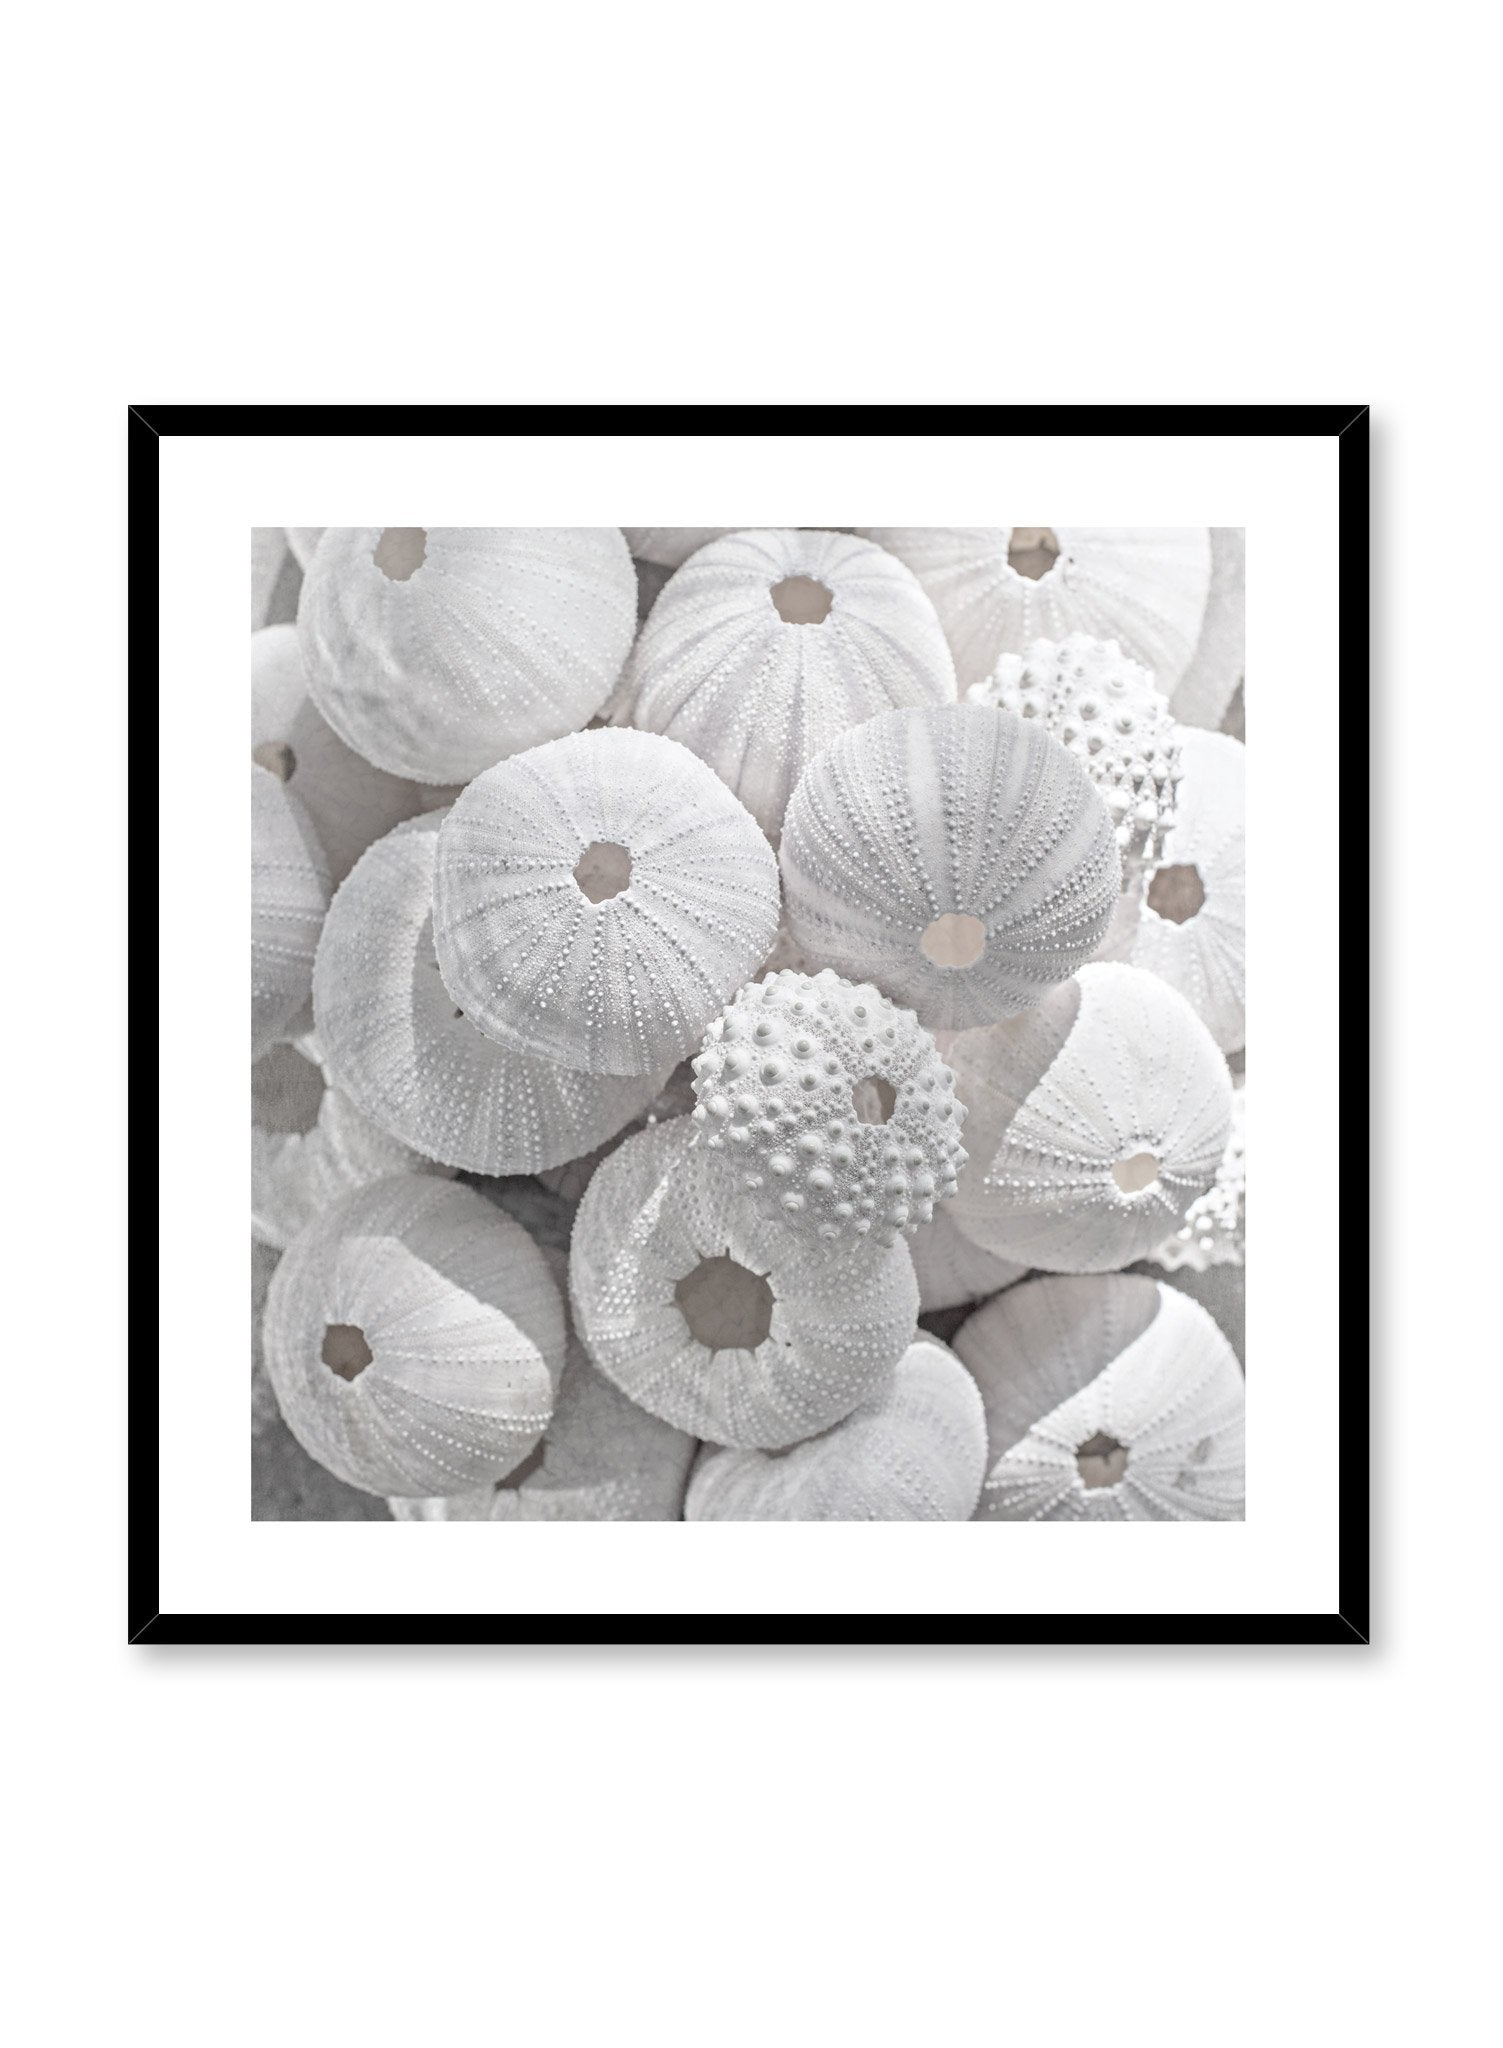 Minimalist design photography poster of Sea Treasures by Love Warriors Creative Studio - Buy at Opposite Wall